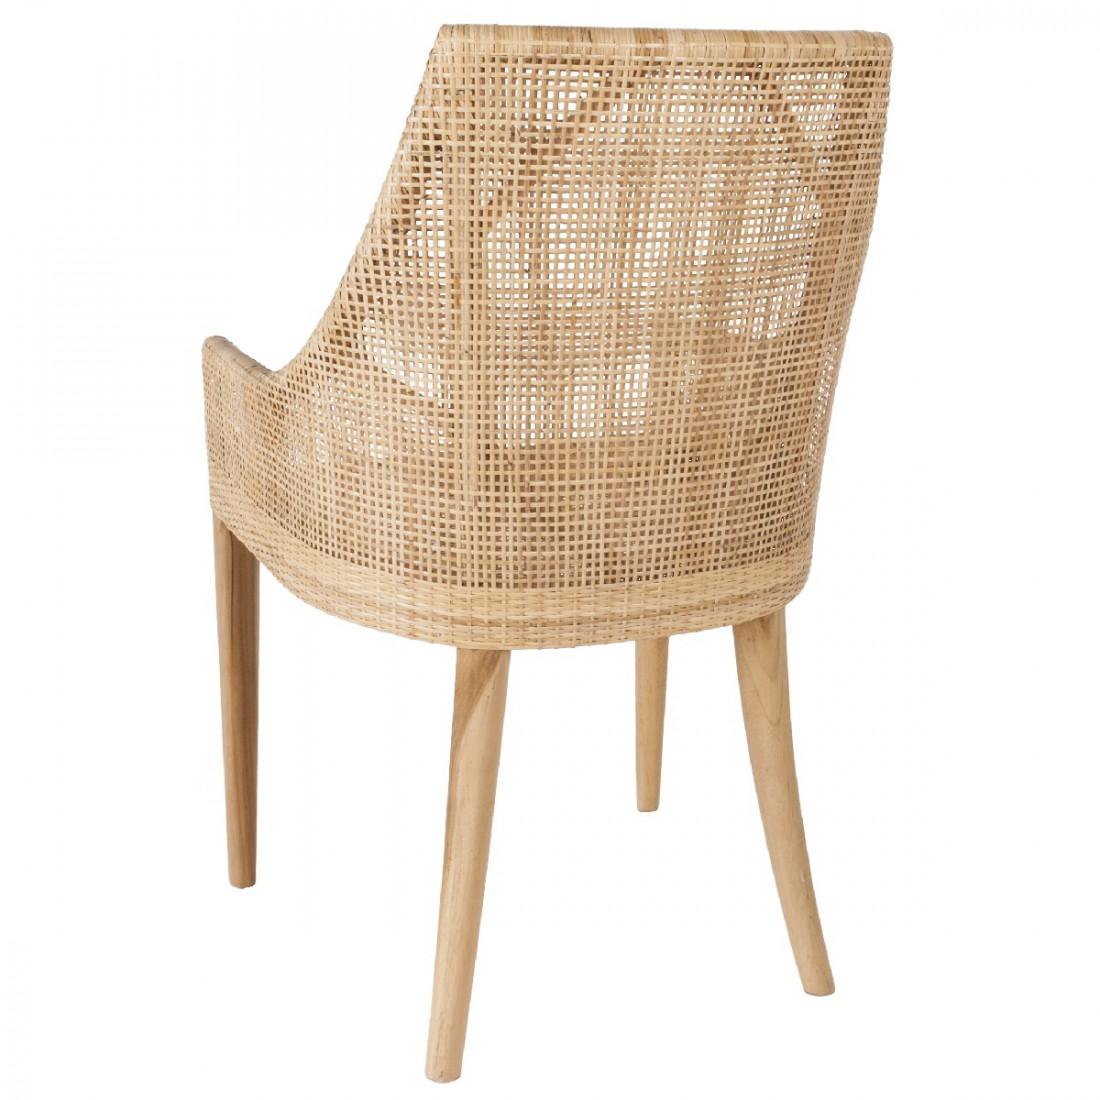 handcrafted rattan chair